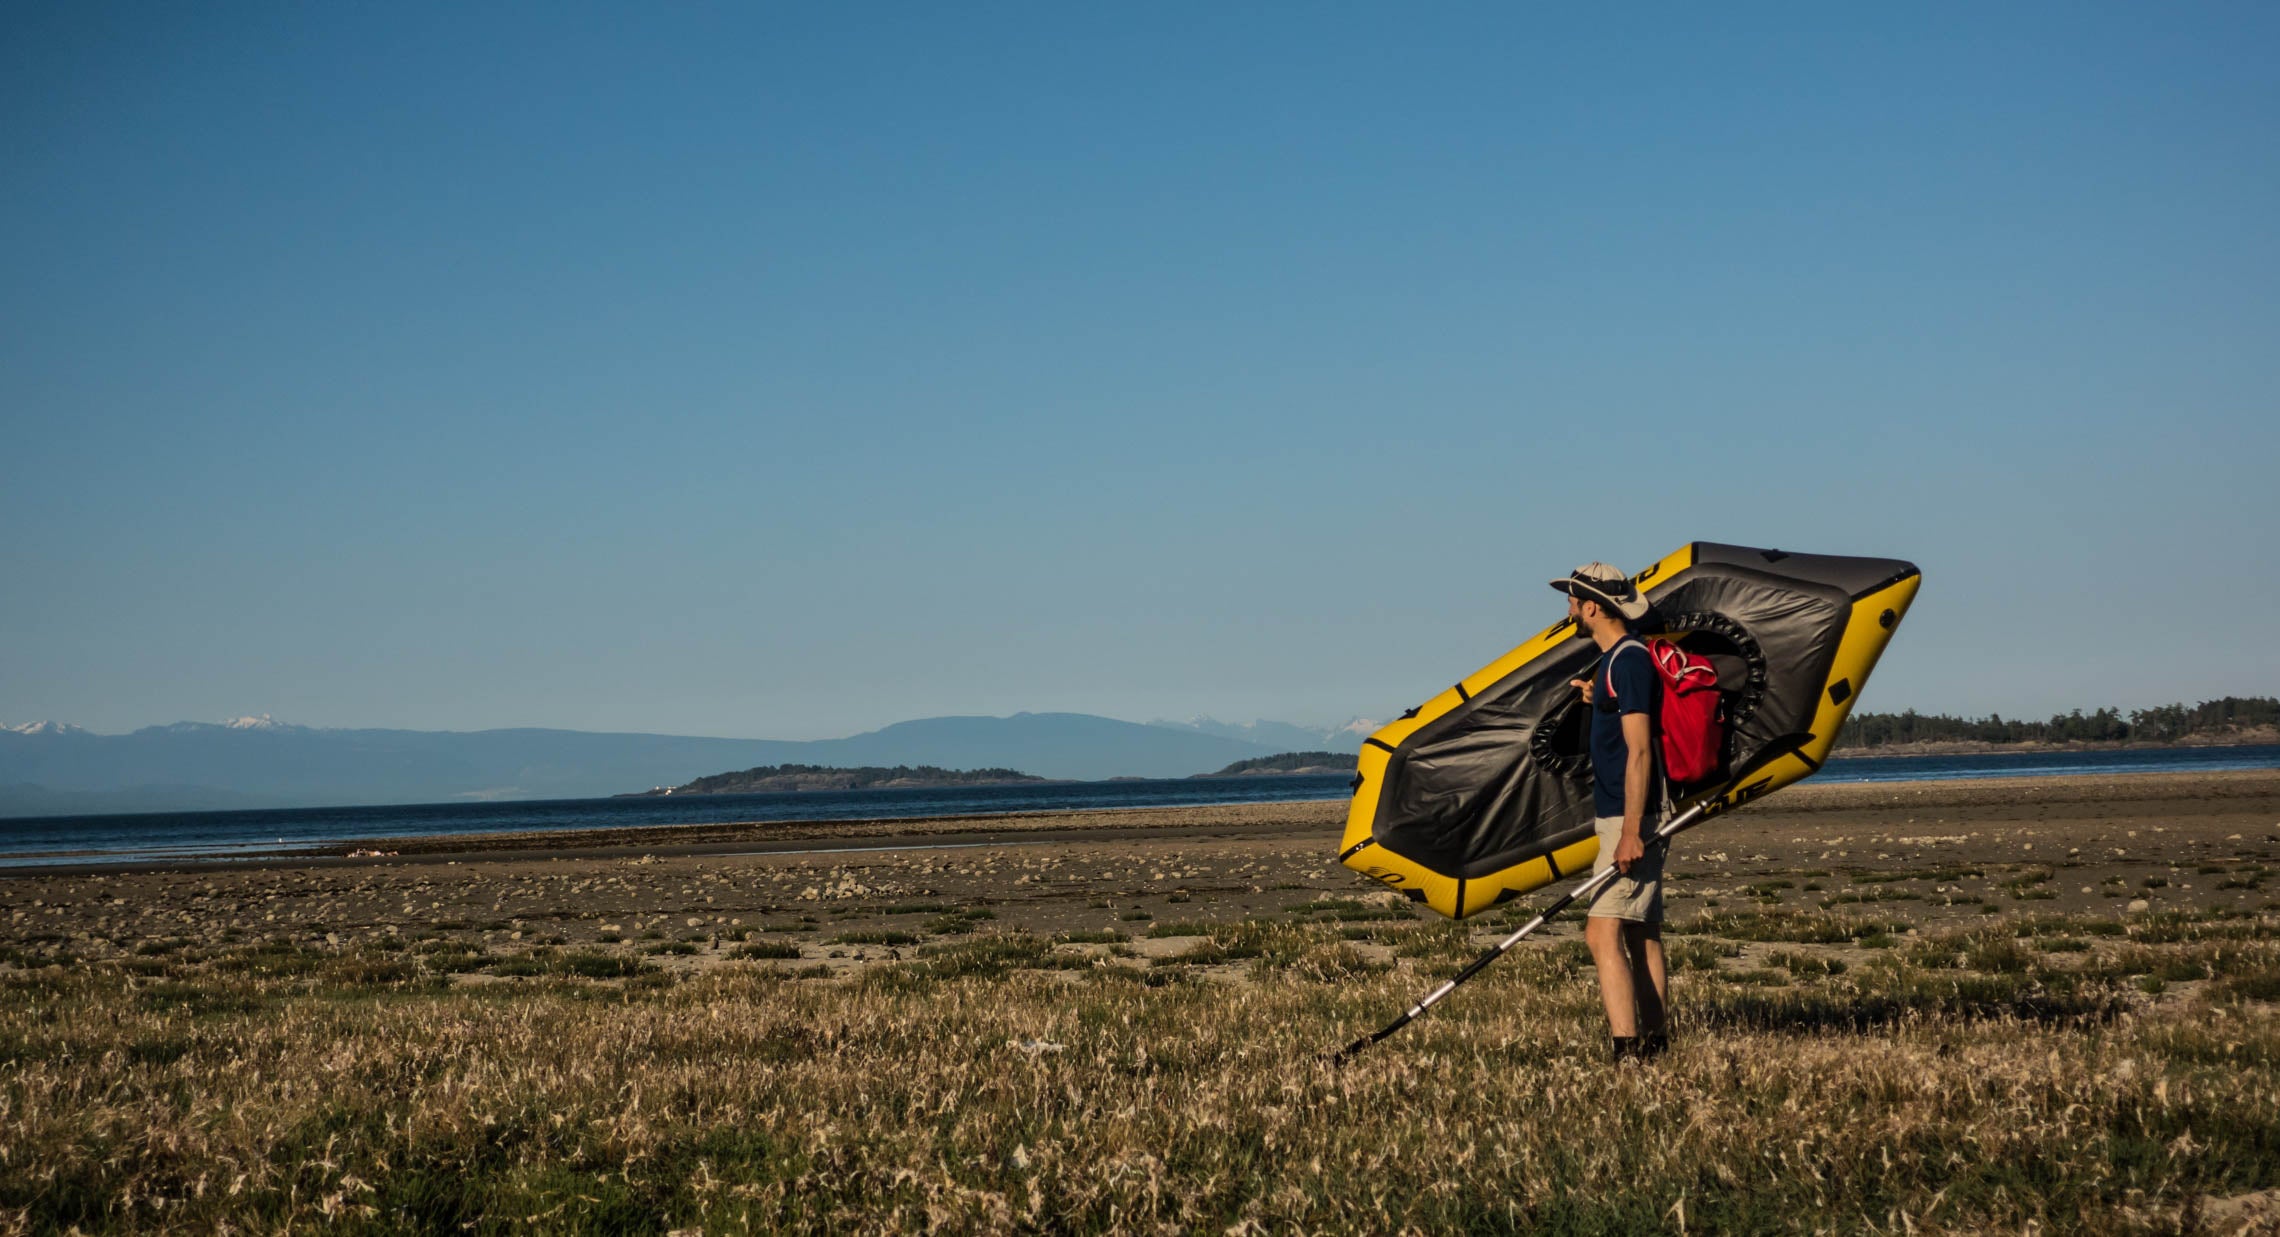 Packrafting is fun without the hassle. Why Packraft Kokopelli